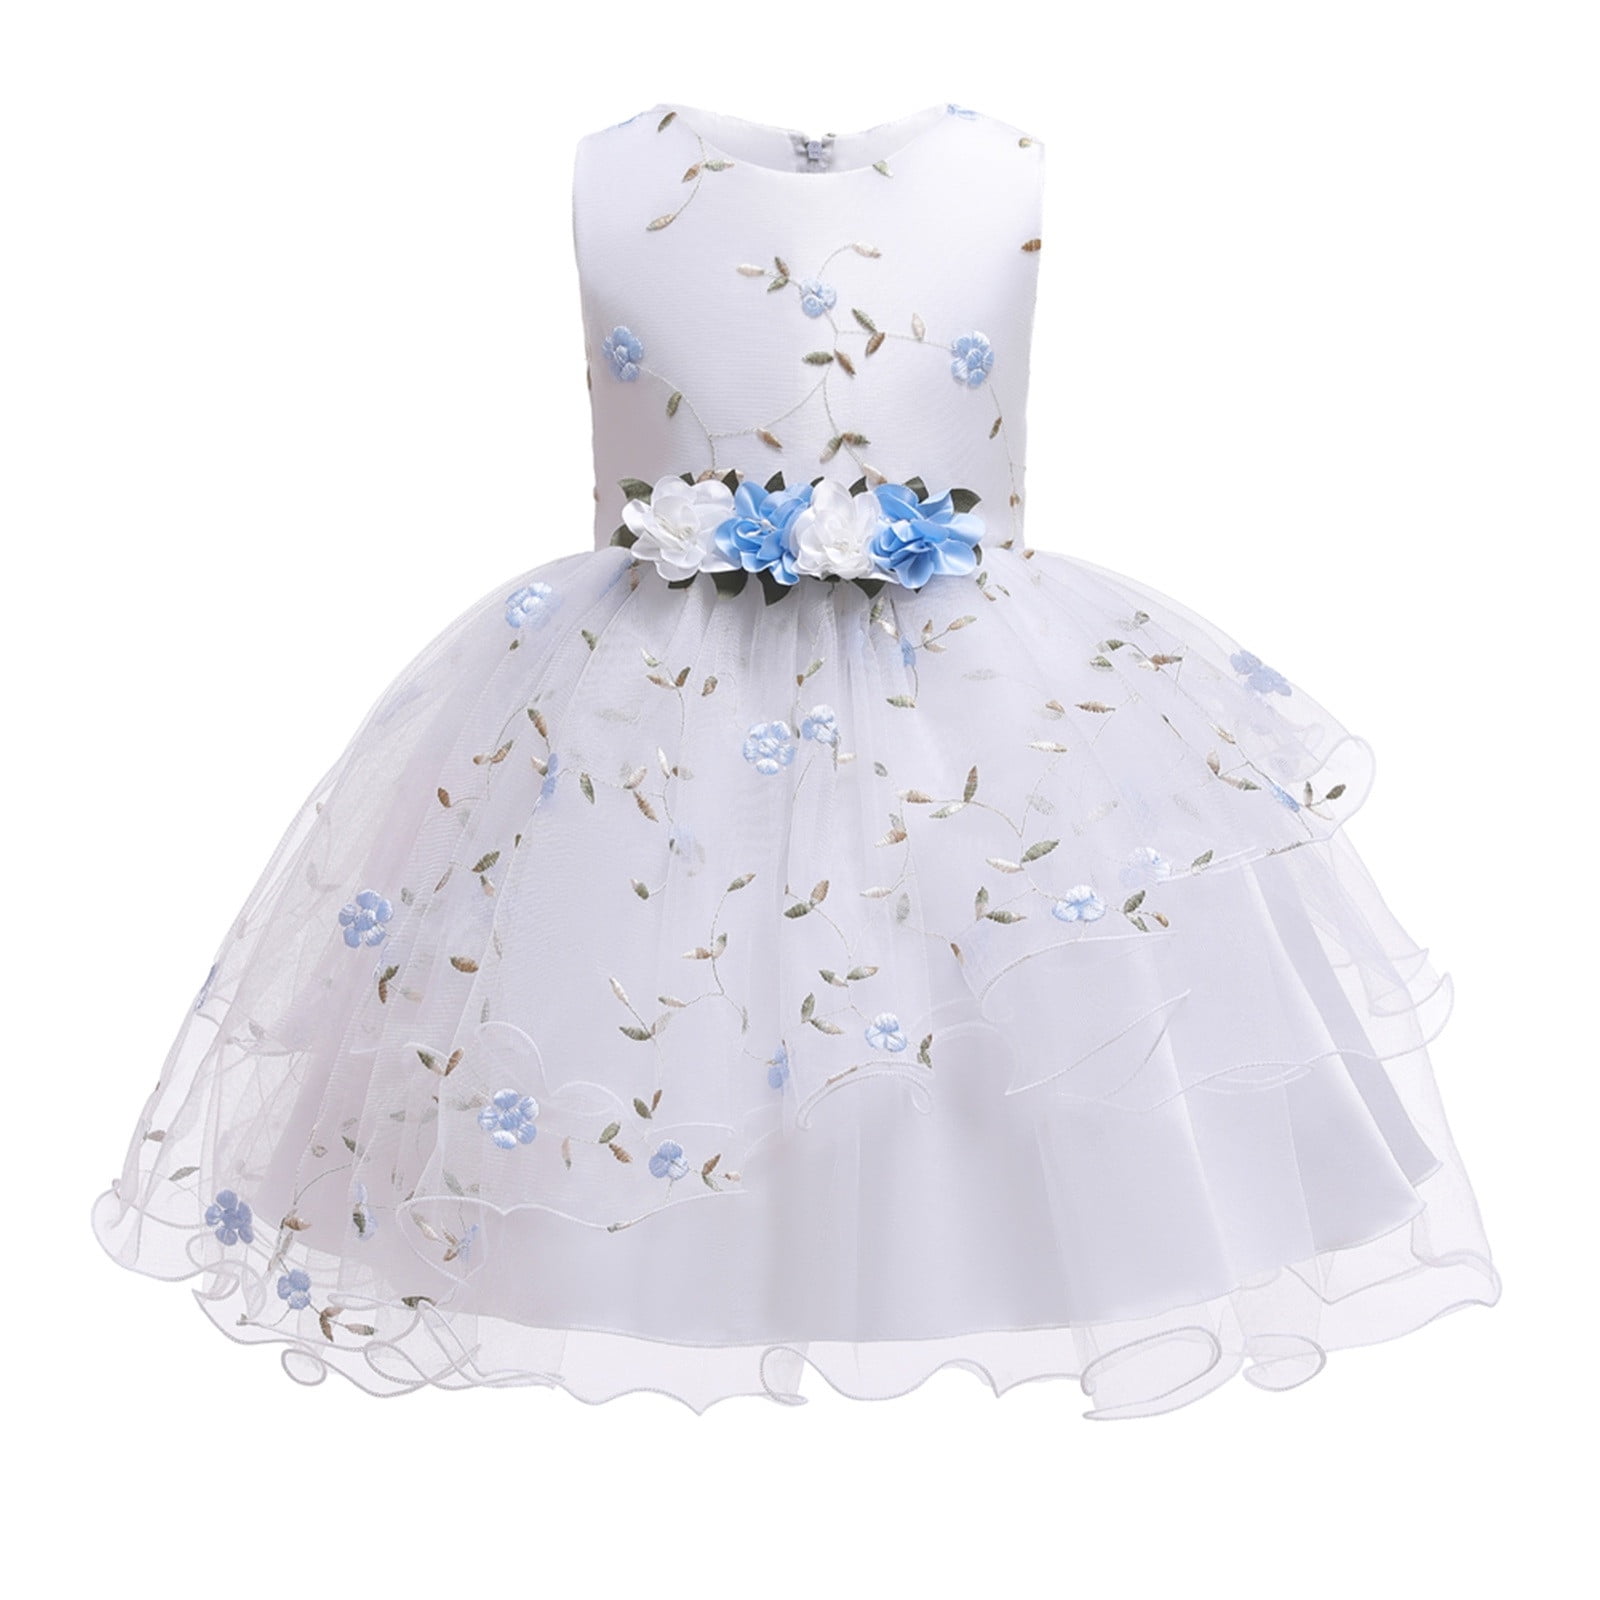 Adviicd Christmas Dress for Girls 10-12 Tulle Prom 2-10y Outfits Children Kid Ball Clothes Girl Girl Clothes Size 4, Girl's, Size: 8-9 Years